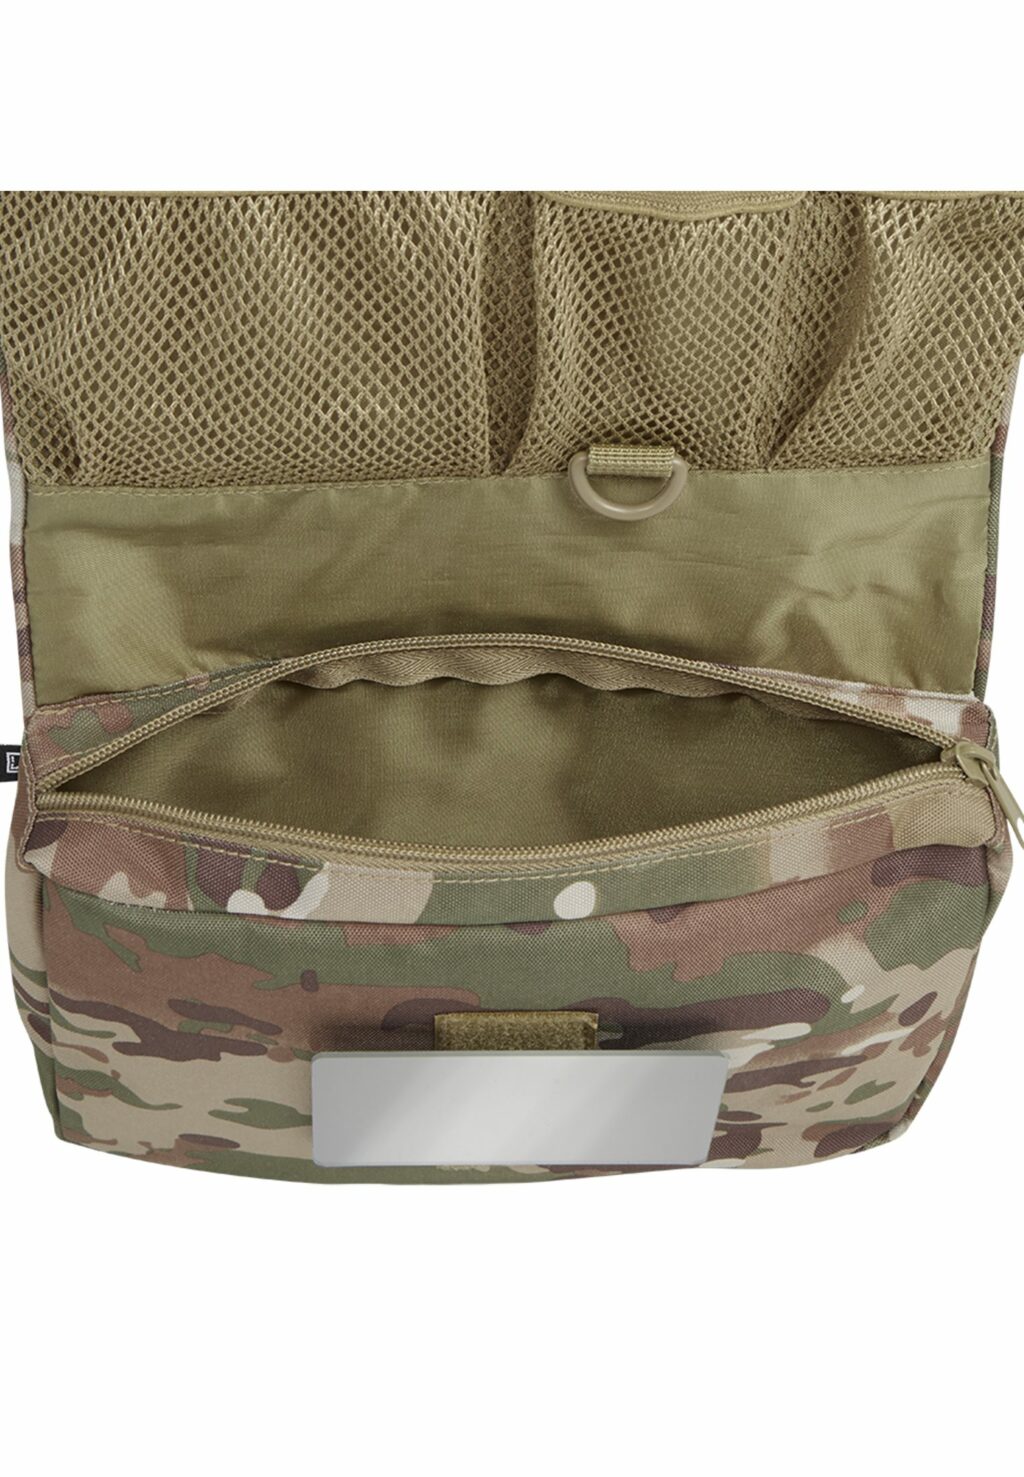 Brandit Toiletry Bag large tactical camo one BD8061